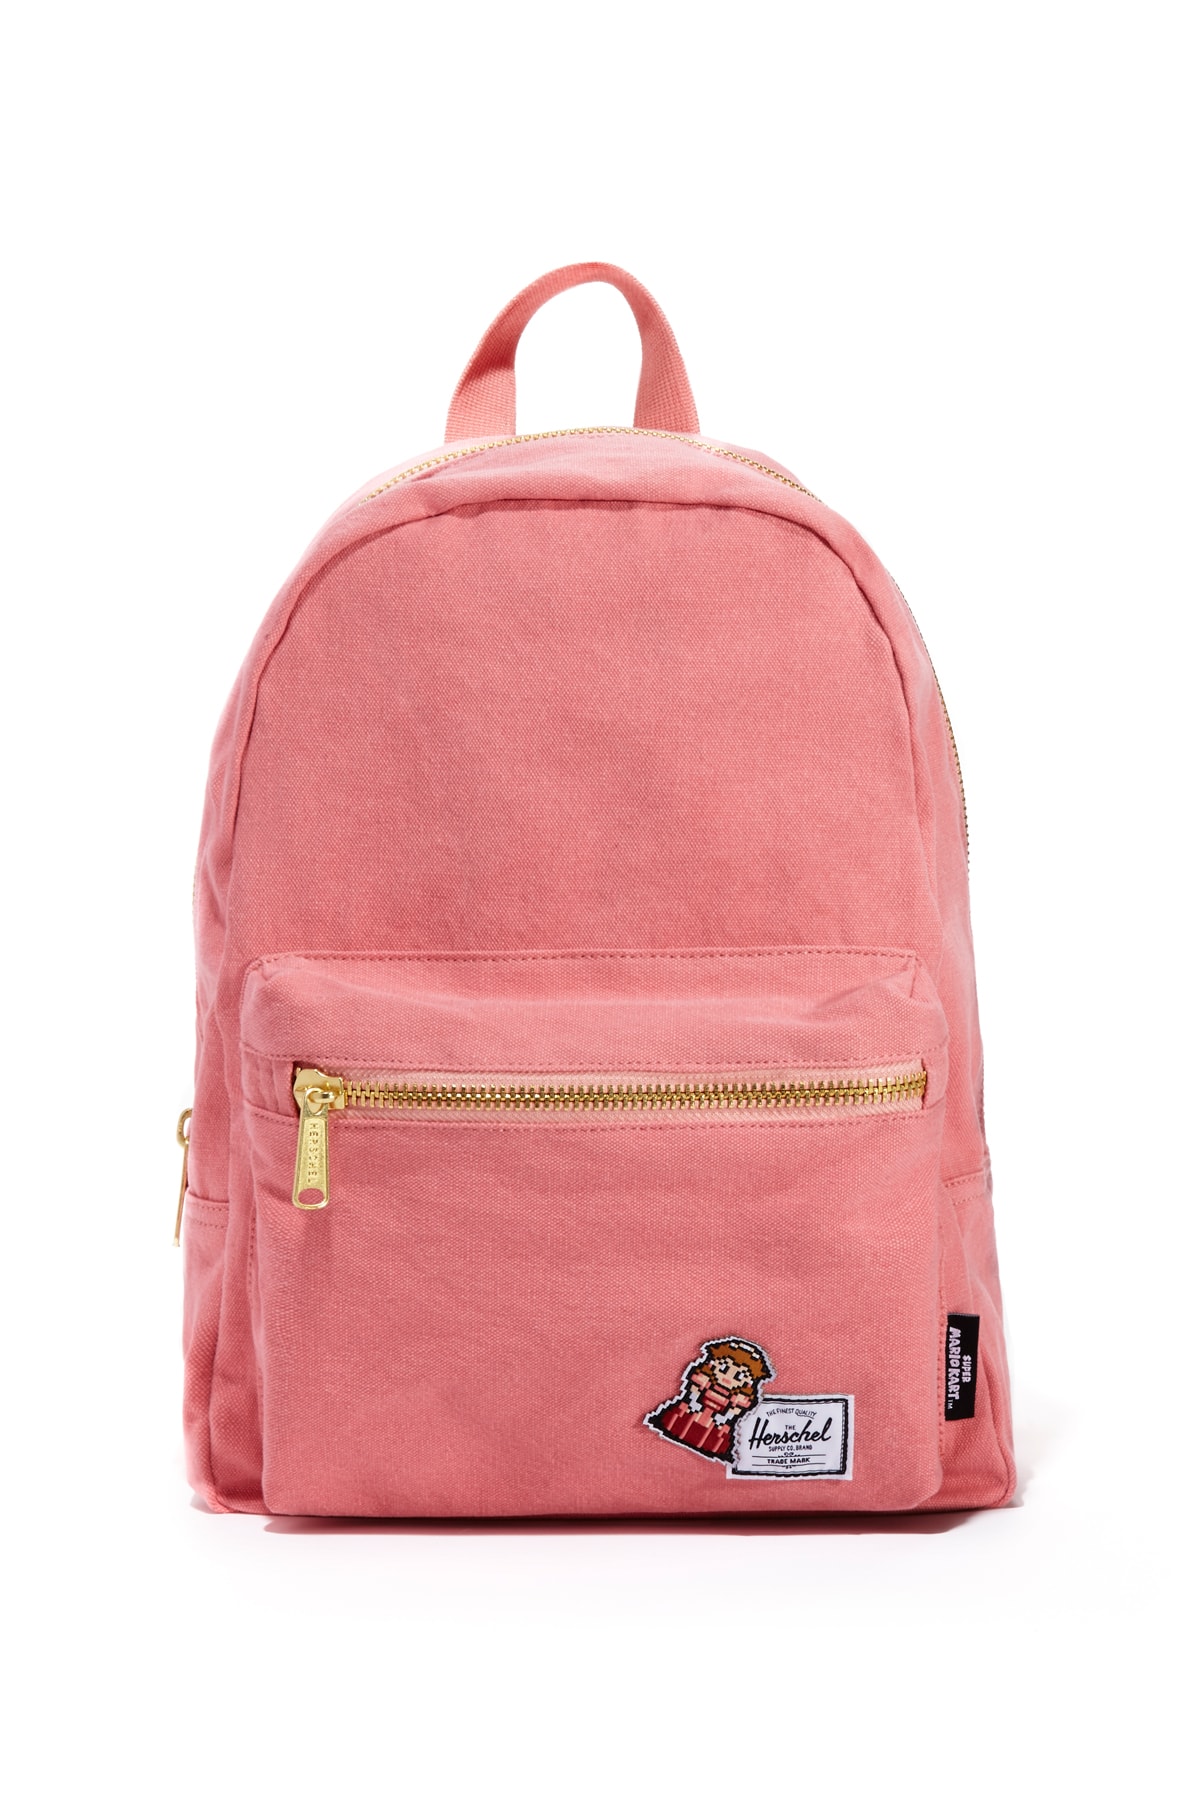 Bloomingdale's x Nintendo National Gamer Day Capsule Collection Herschel Supply Backpack Peach